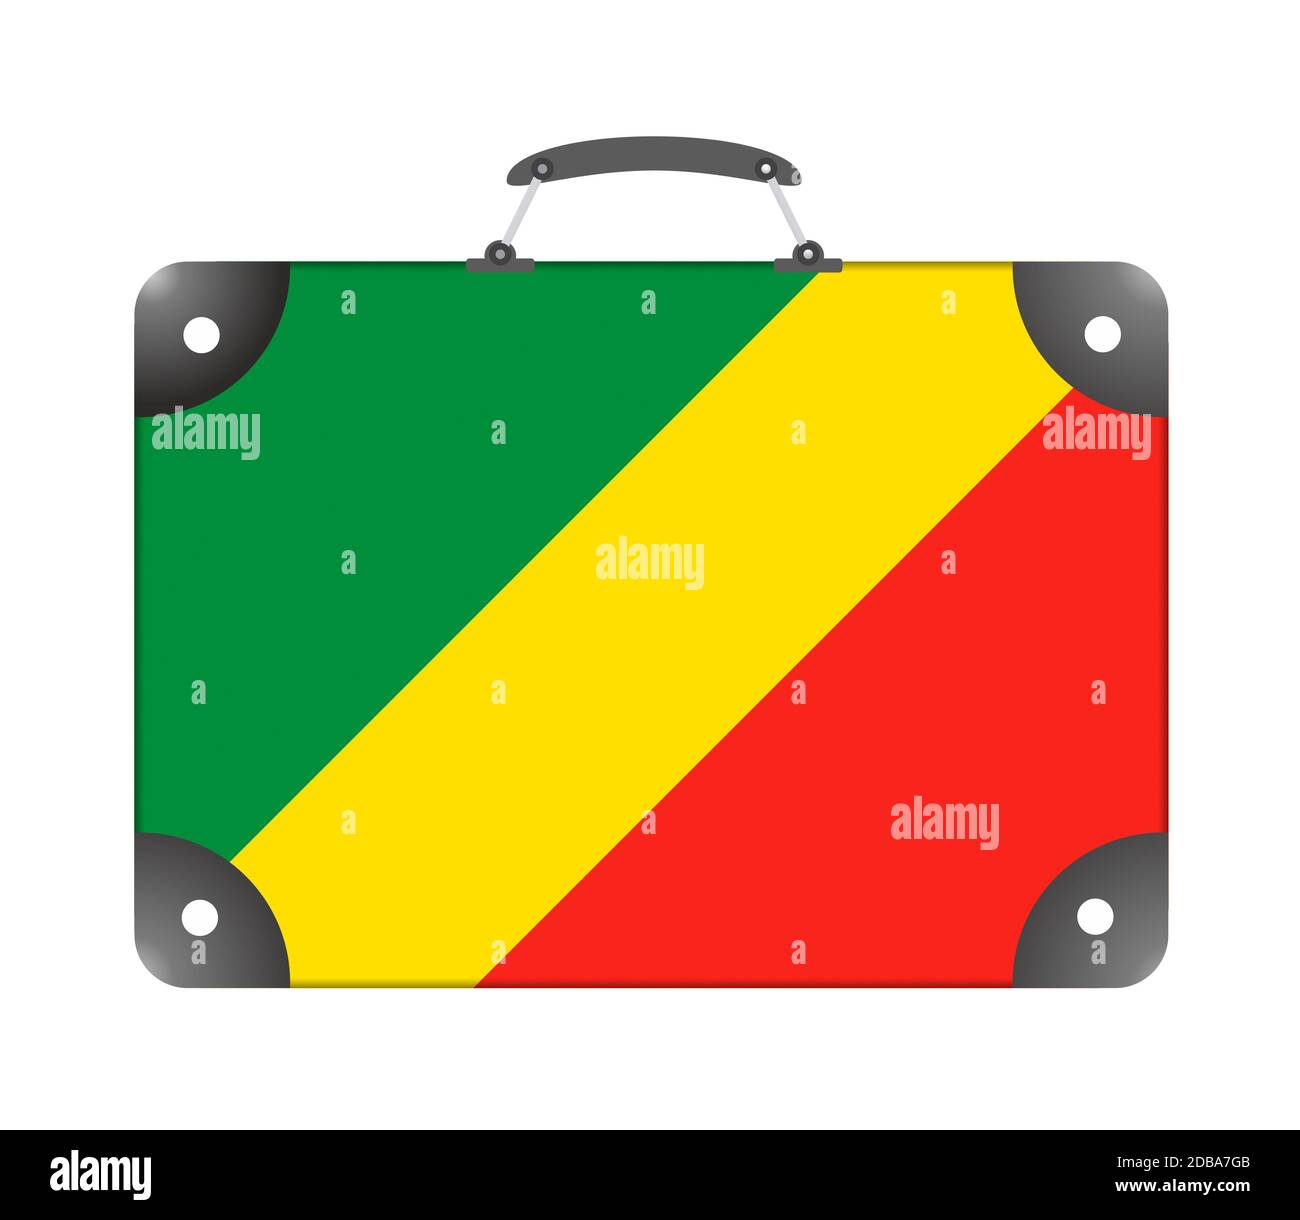 Congo country flag in the form of a travel suitcase on a white background - illustration Stock Photo